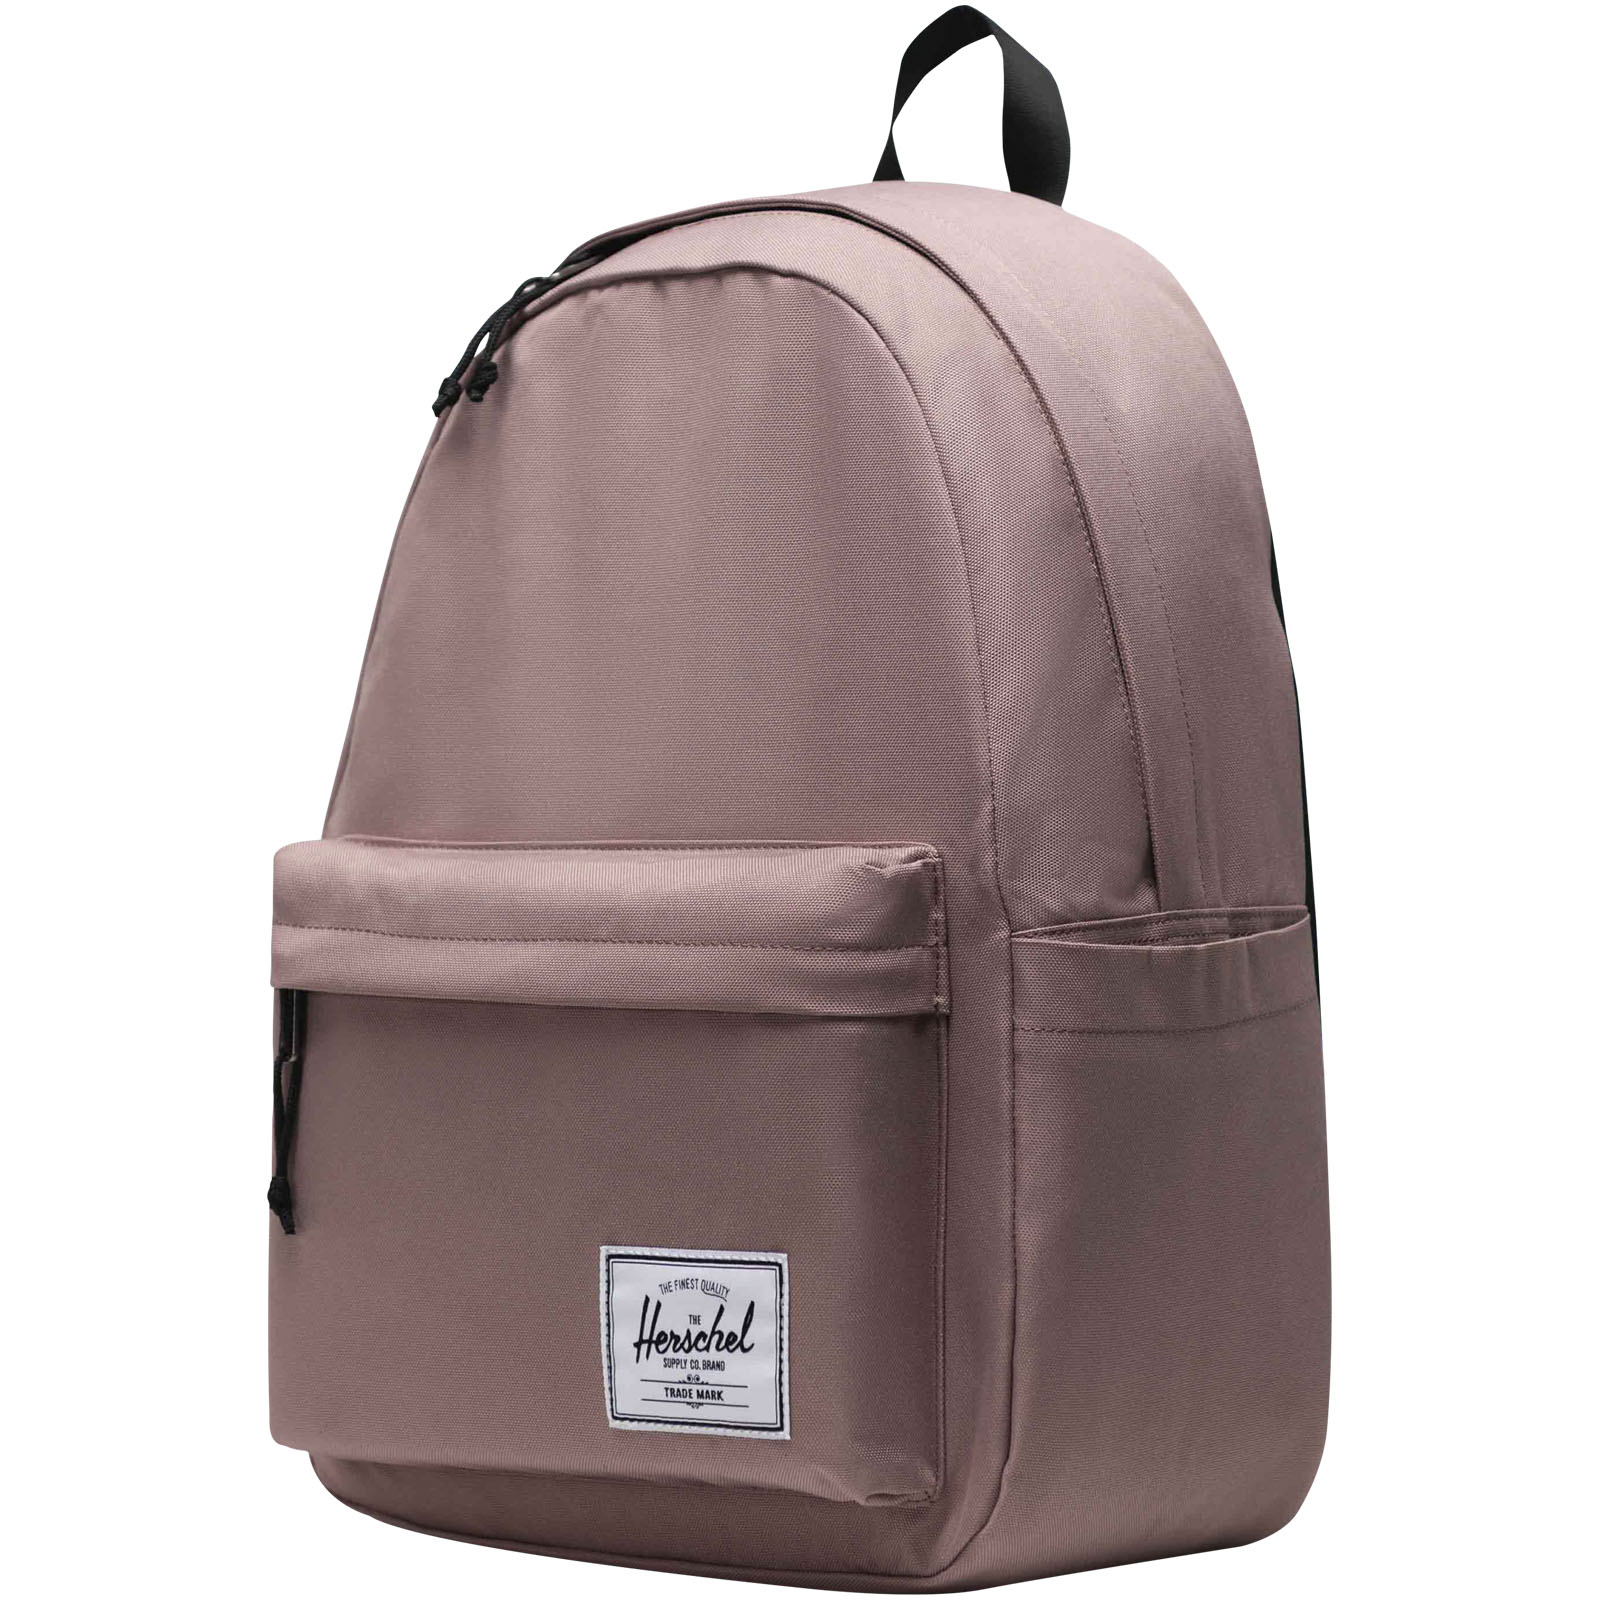 Bags - Herschel Classic™ recycled laptop backpack 26L